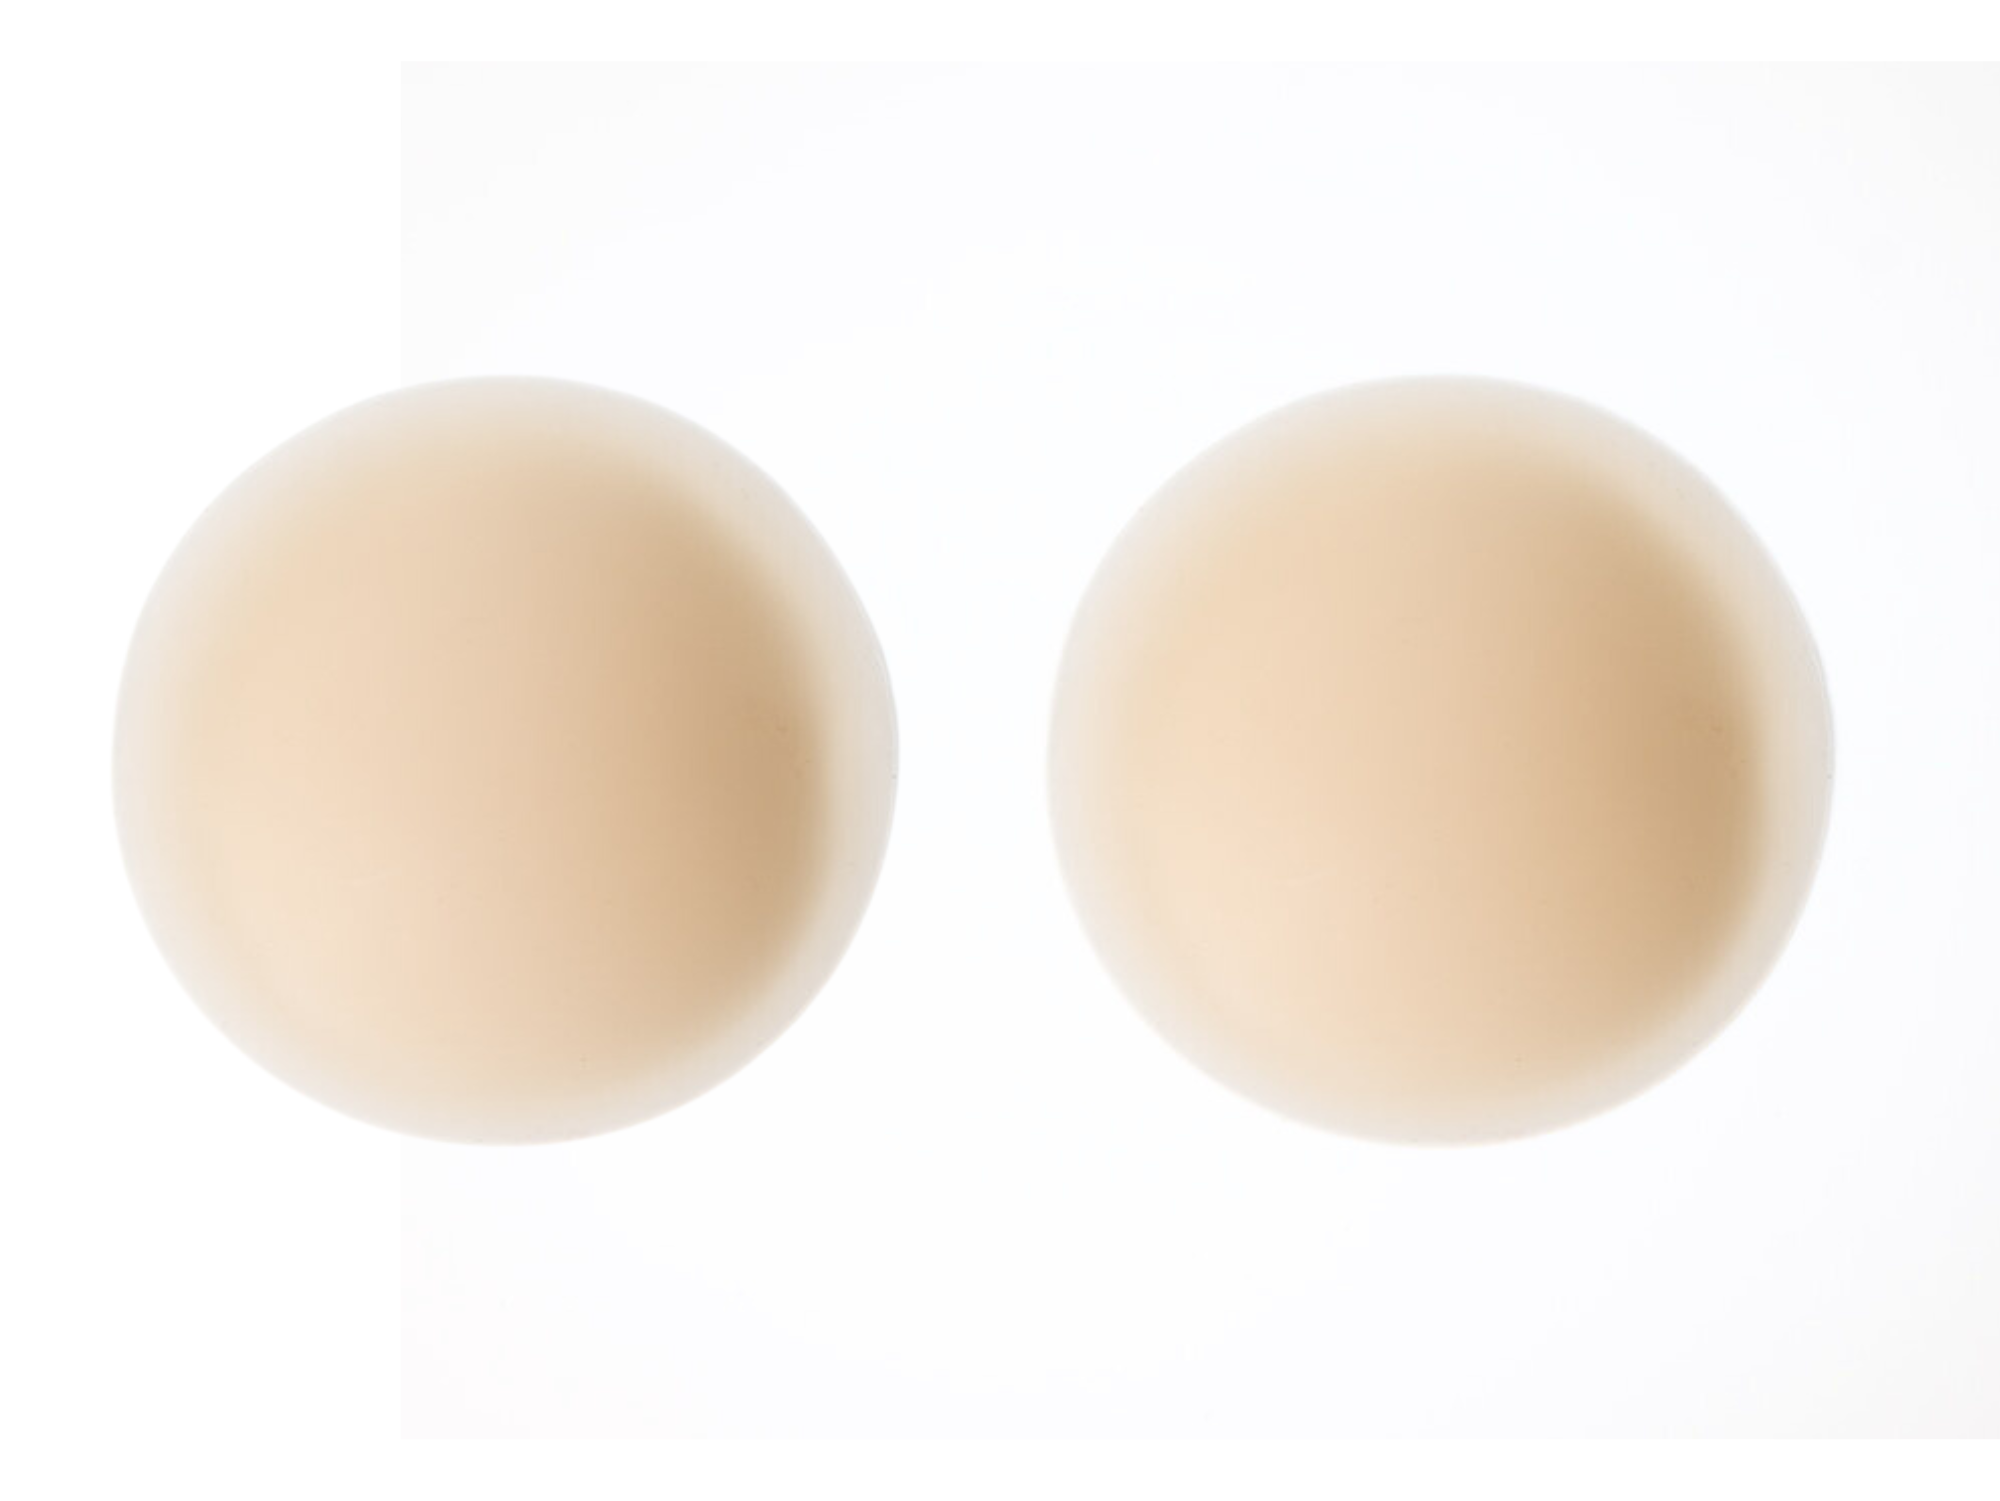 Fair Flesh tone pasties similar to Browndages Bandages in the color "Sand" for very fair complexions. Similar to Maybelline foundation in "Fair Porcelain".